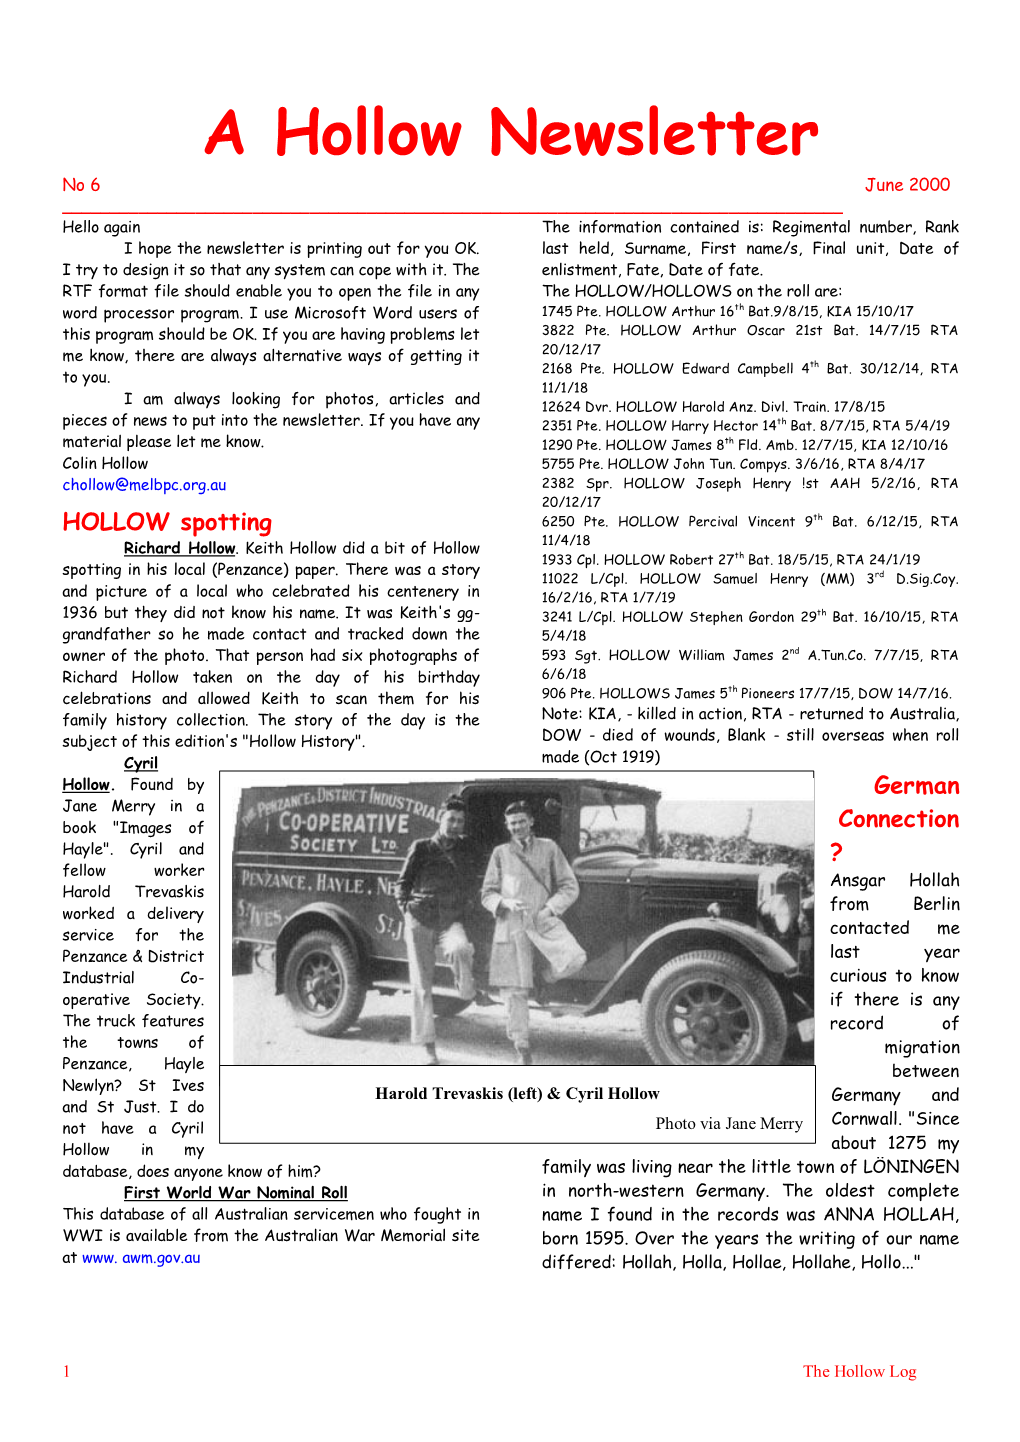 A Hollow Newsletter, Issue 6, June 2000